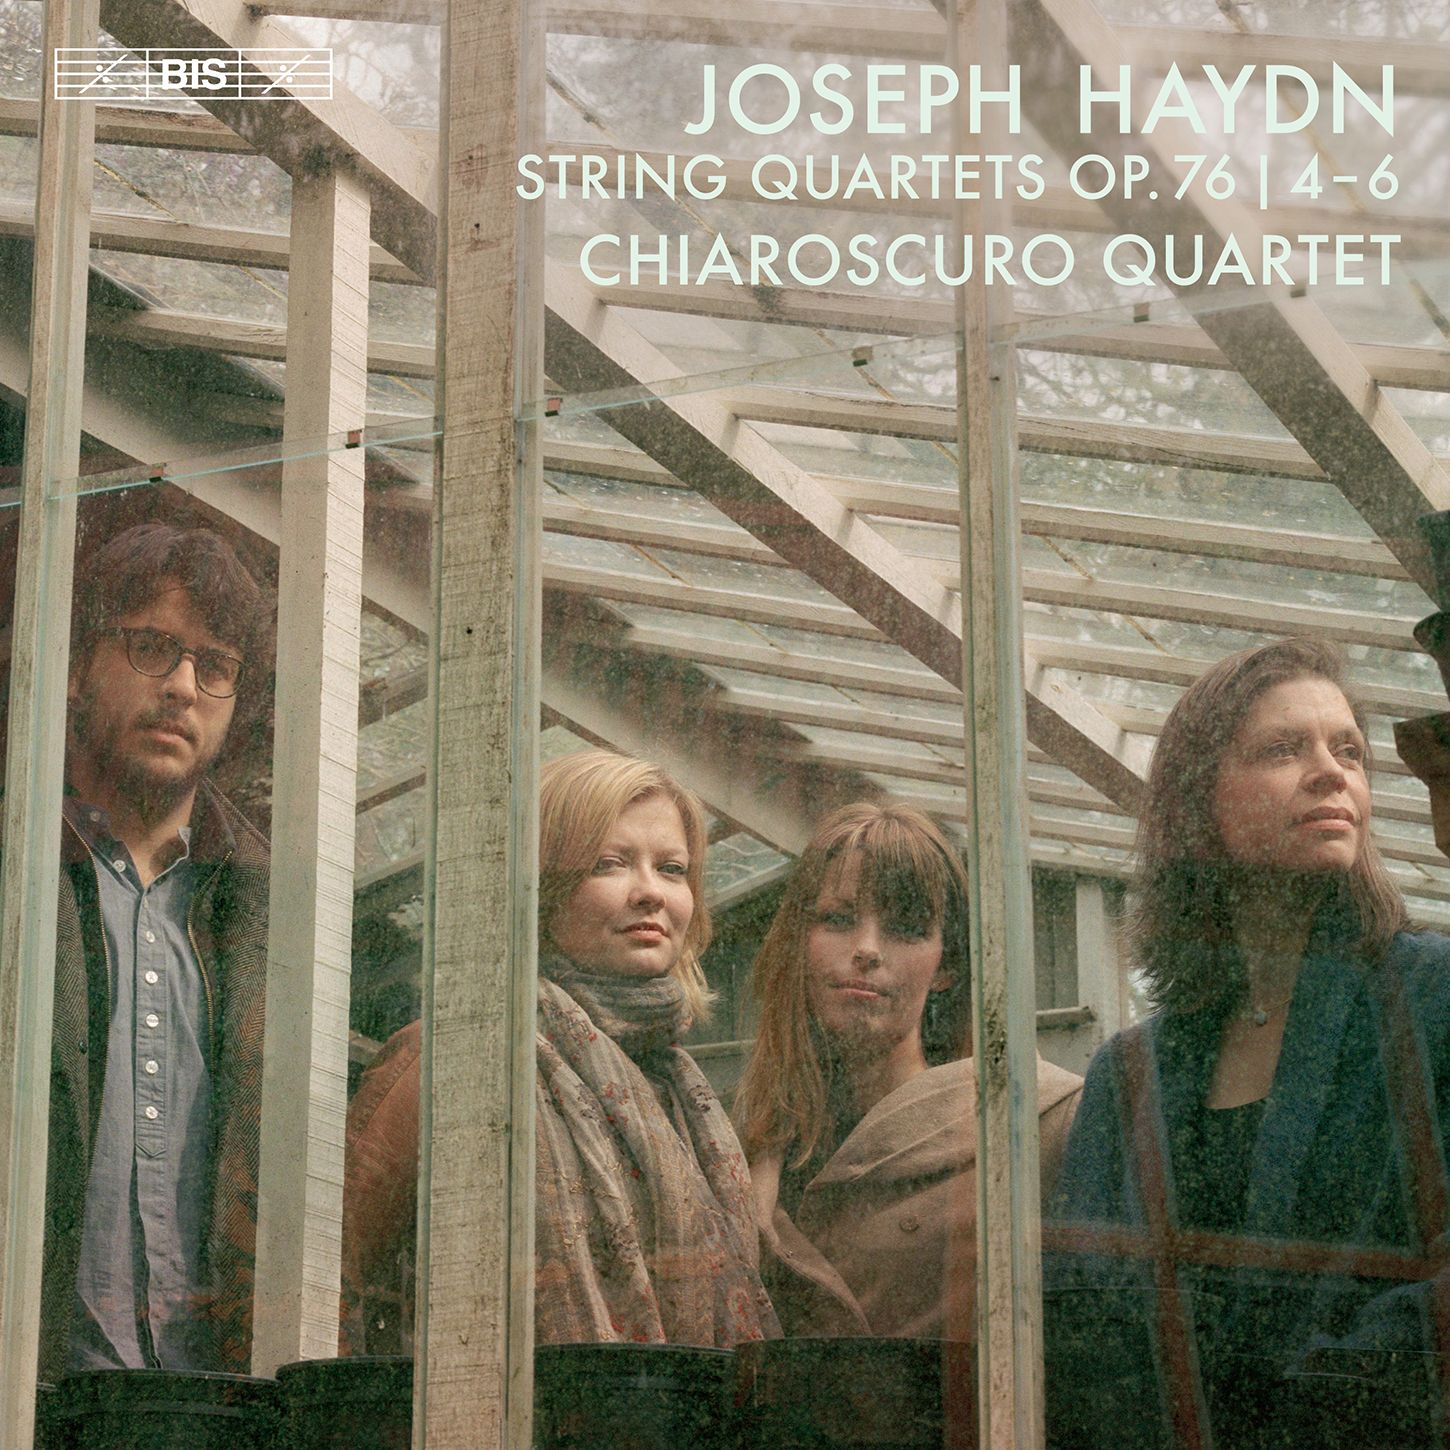 More sheer joy: the Chiaroscuro Quartet completes Haydn's Op. 76